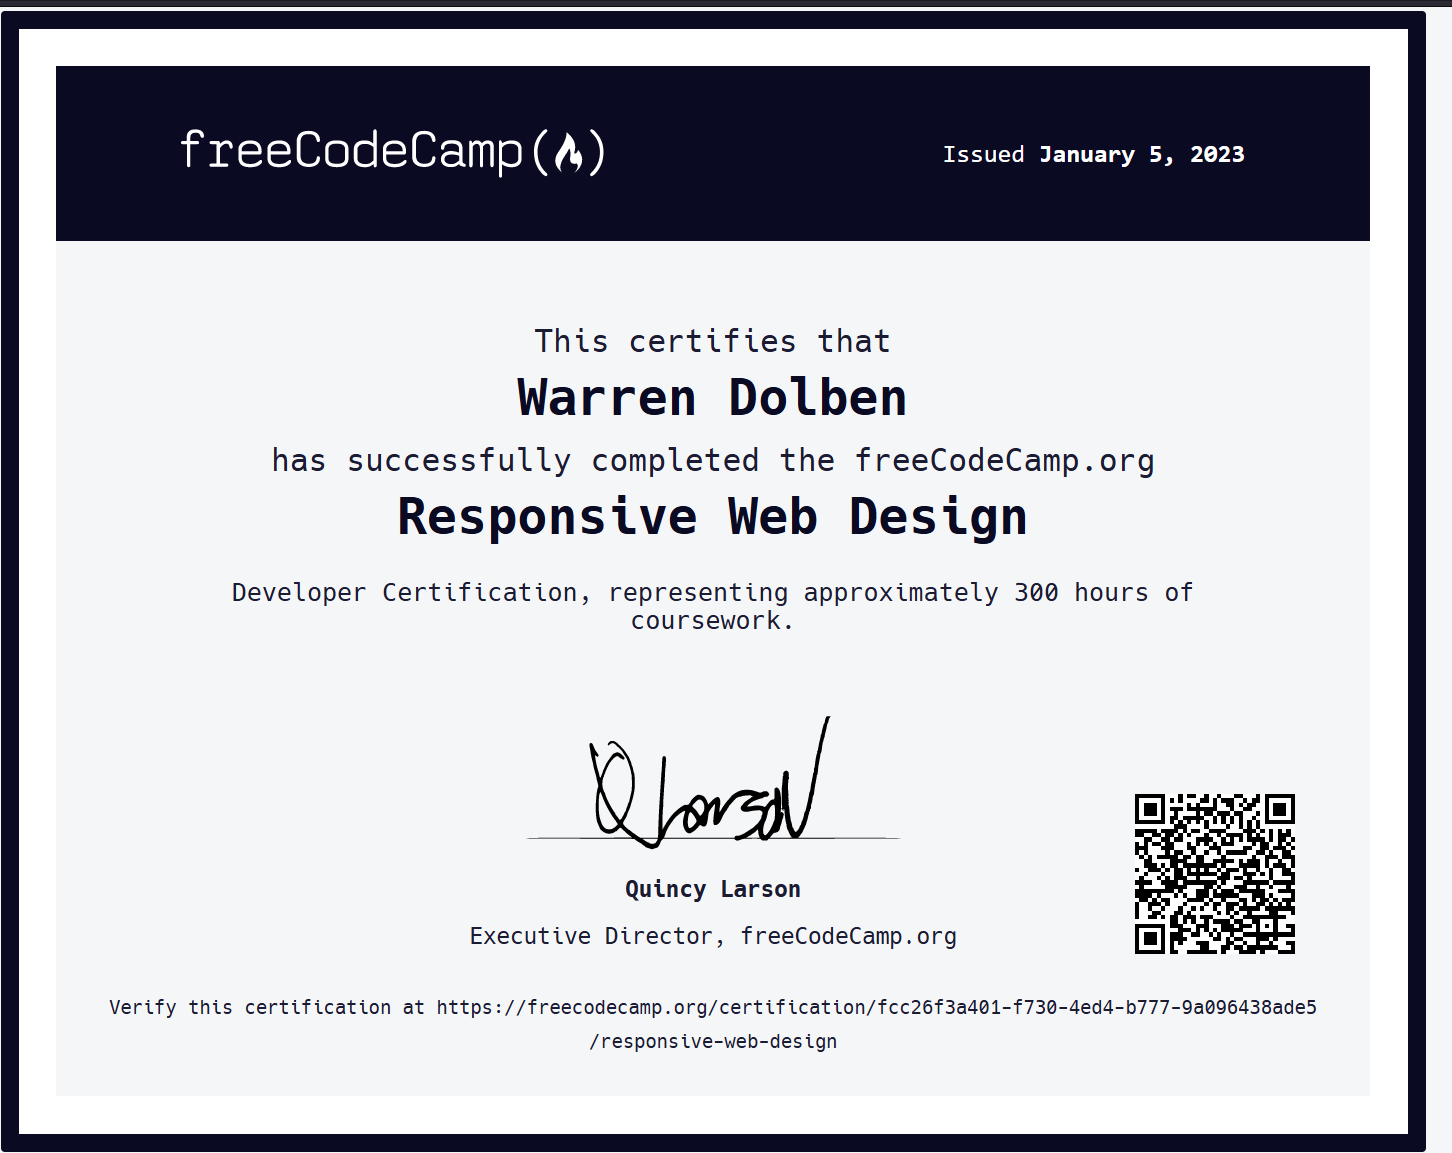 My certificate from freecodecamp for Responsive Web Design.